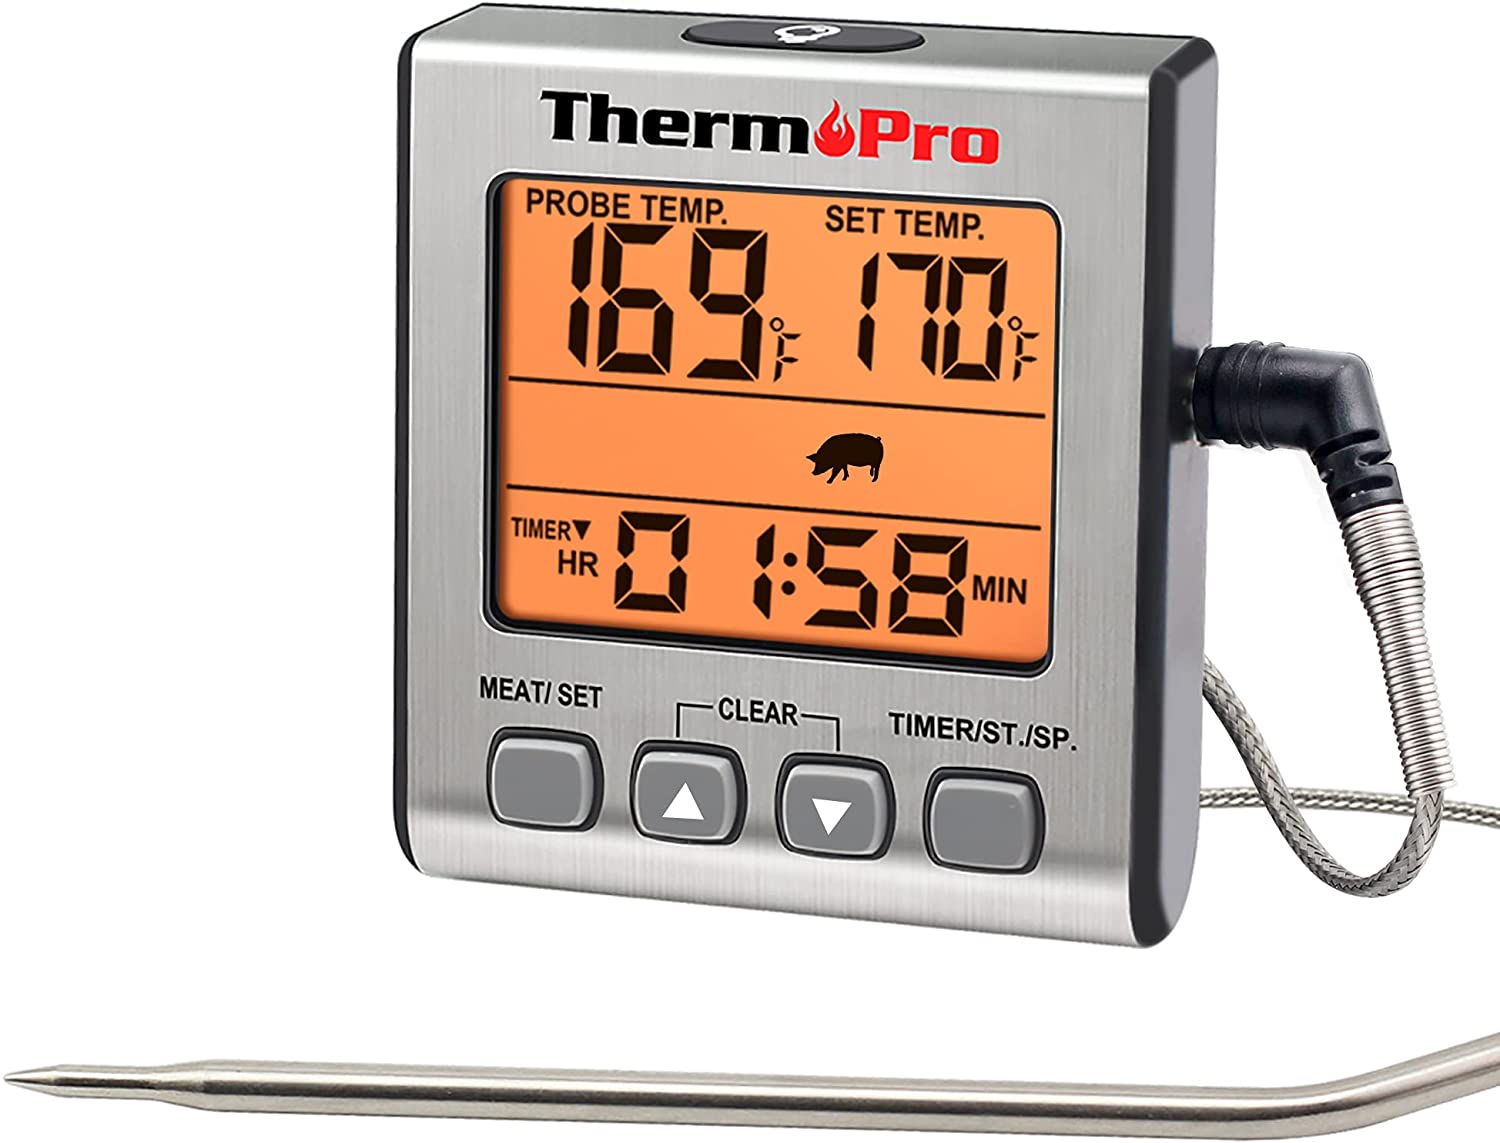 digital meat thermometer reading 169 degrees set to a temperature of 170 degrees and with a 1 hour and 58 minute timer